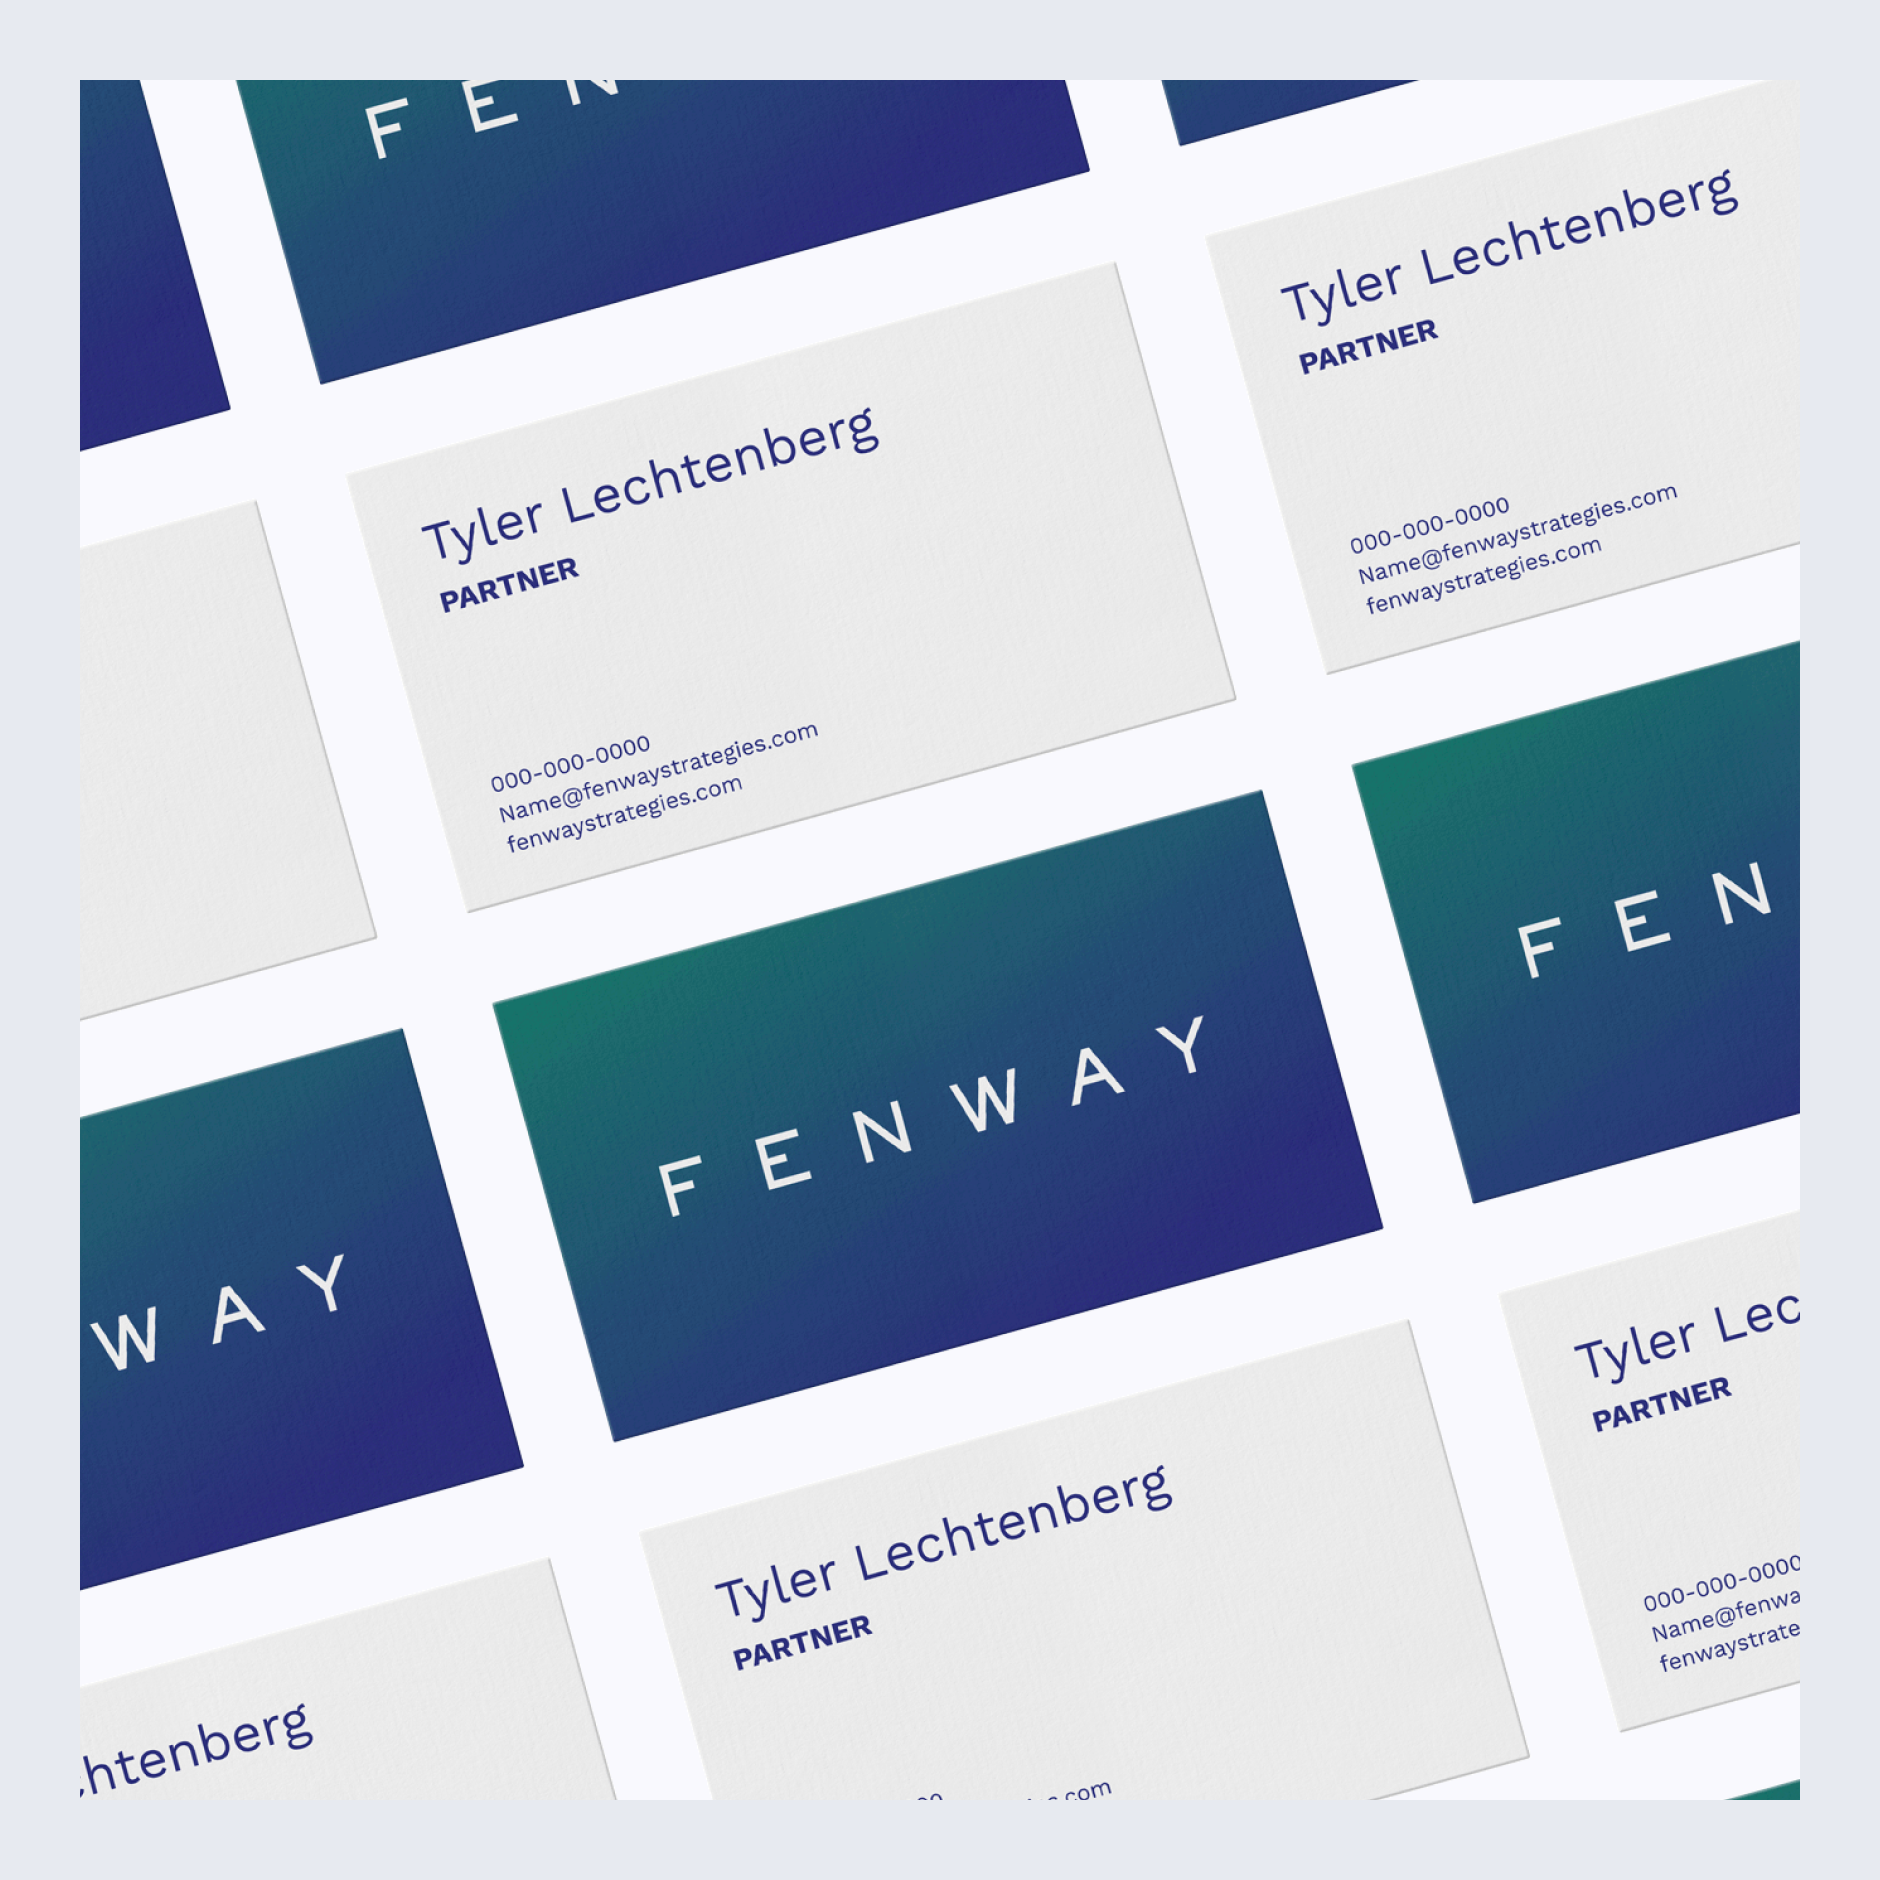 Fenway business cards laid out in a grid